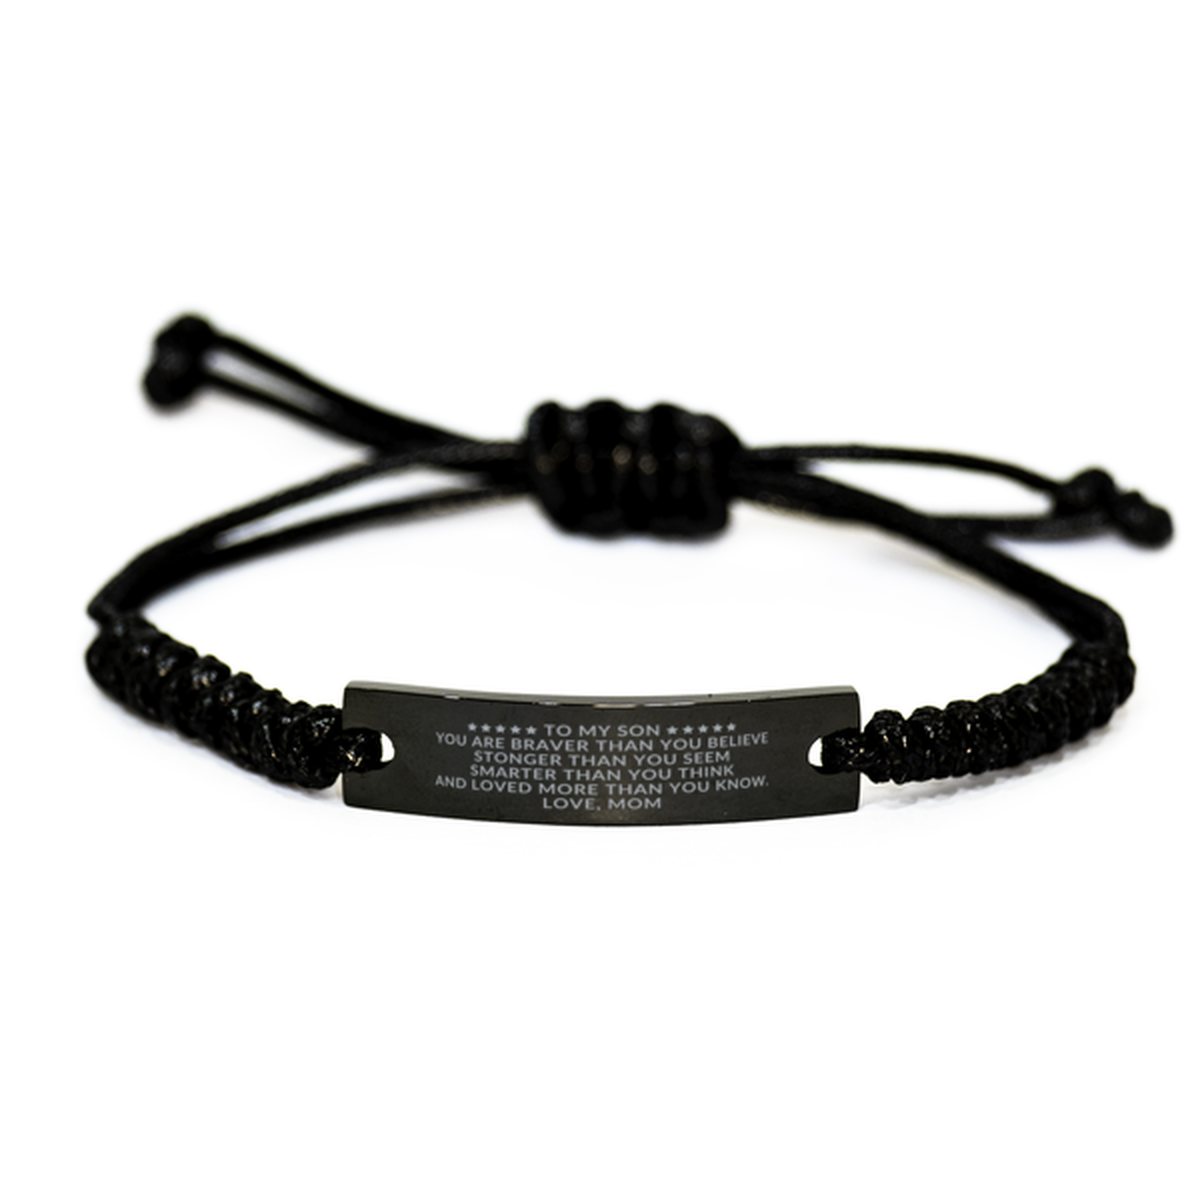 Black Leather Braided Rope Engraved Bracelet Gif For Son